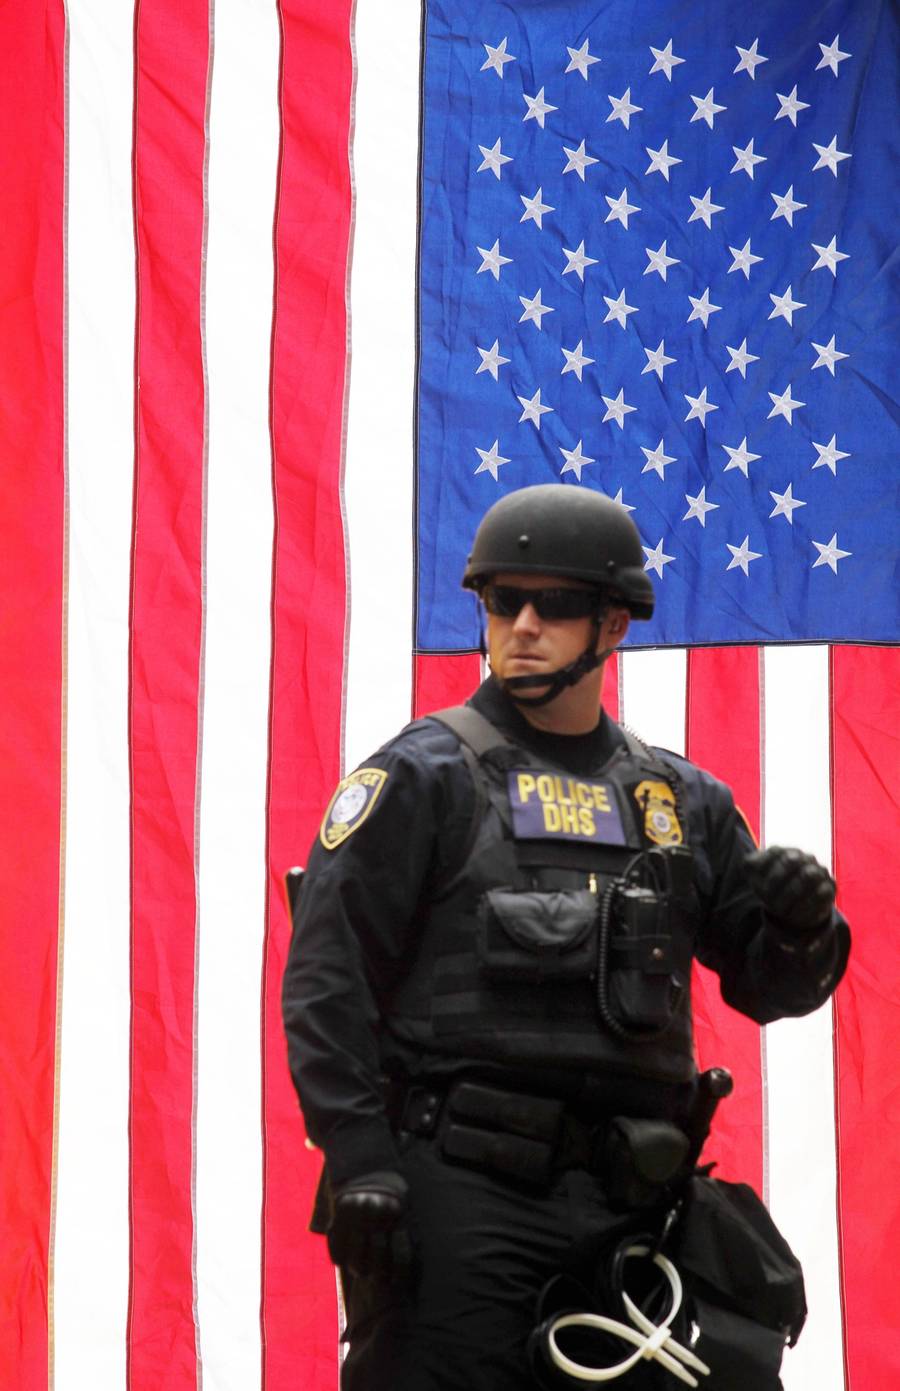 A DHS police officer in front of an American flag at a right-wing rally in Portland, Oregon, on June 4, 2017